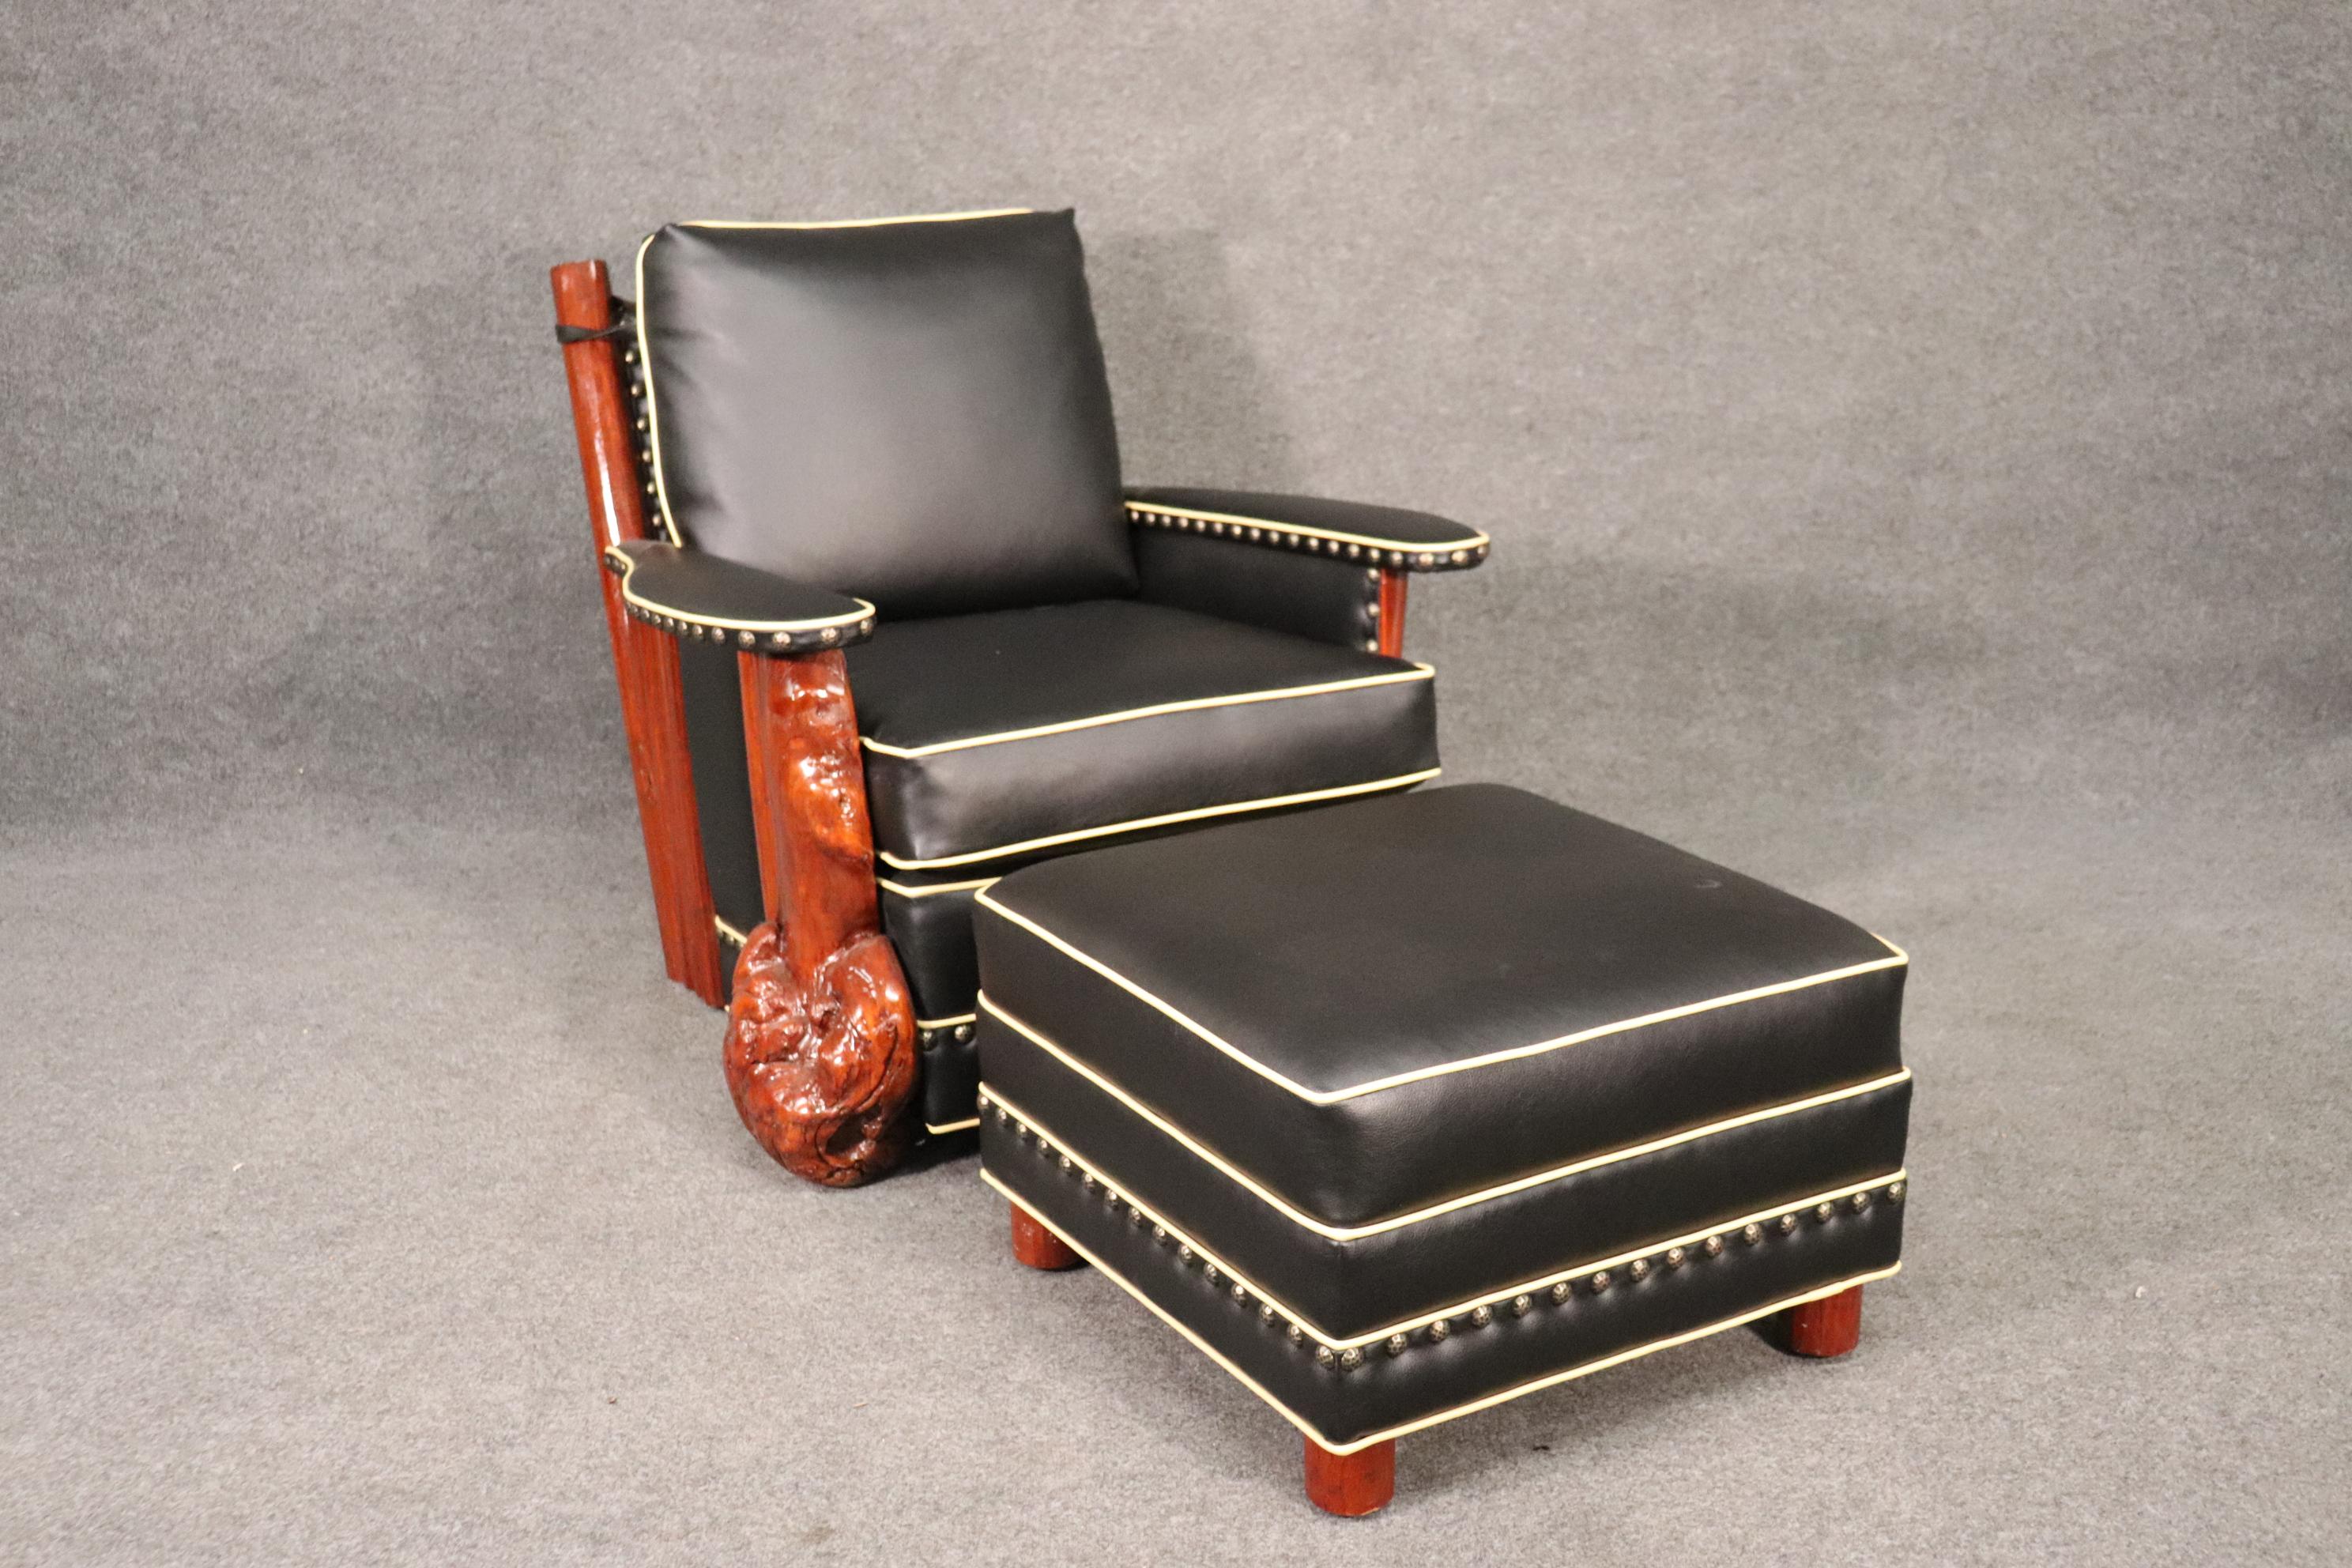 Marc Taggart Made this chair and matching ottoman. They are still making these chairs today. The chair is made of douglas fir and has genuine top-grain black leather with western style brass nailhead trim and a beautiful design. It's like a mix